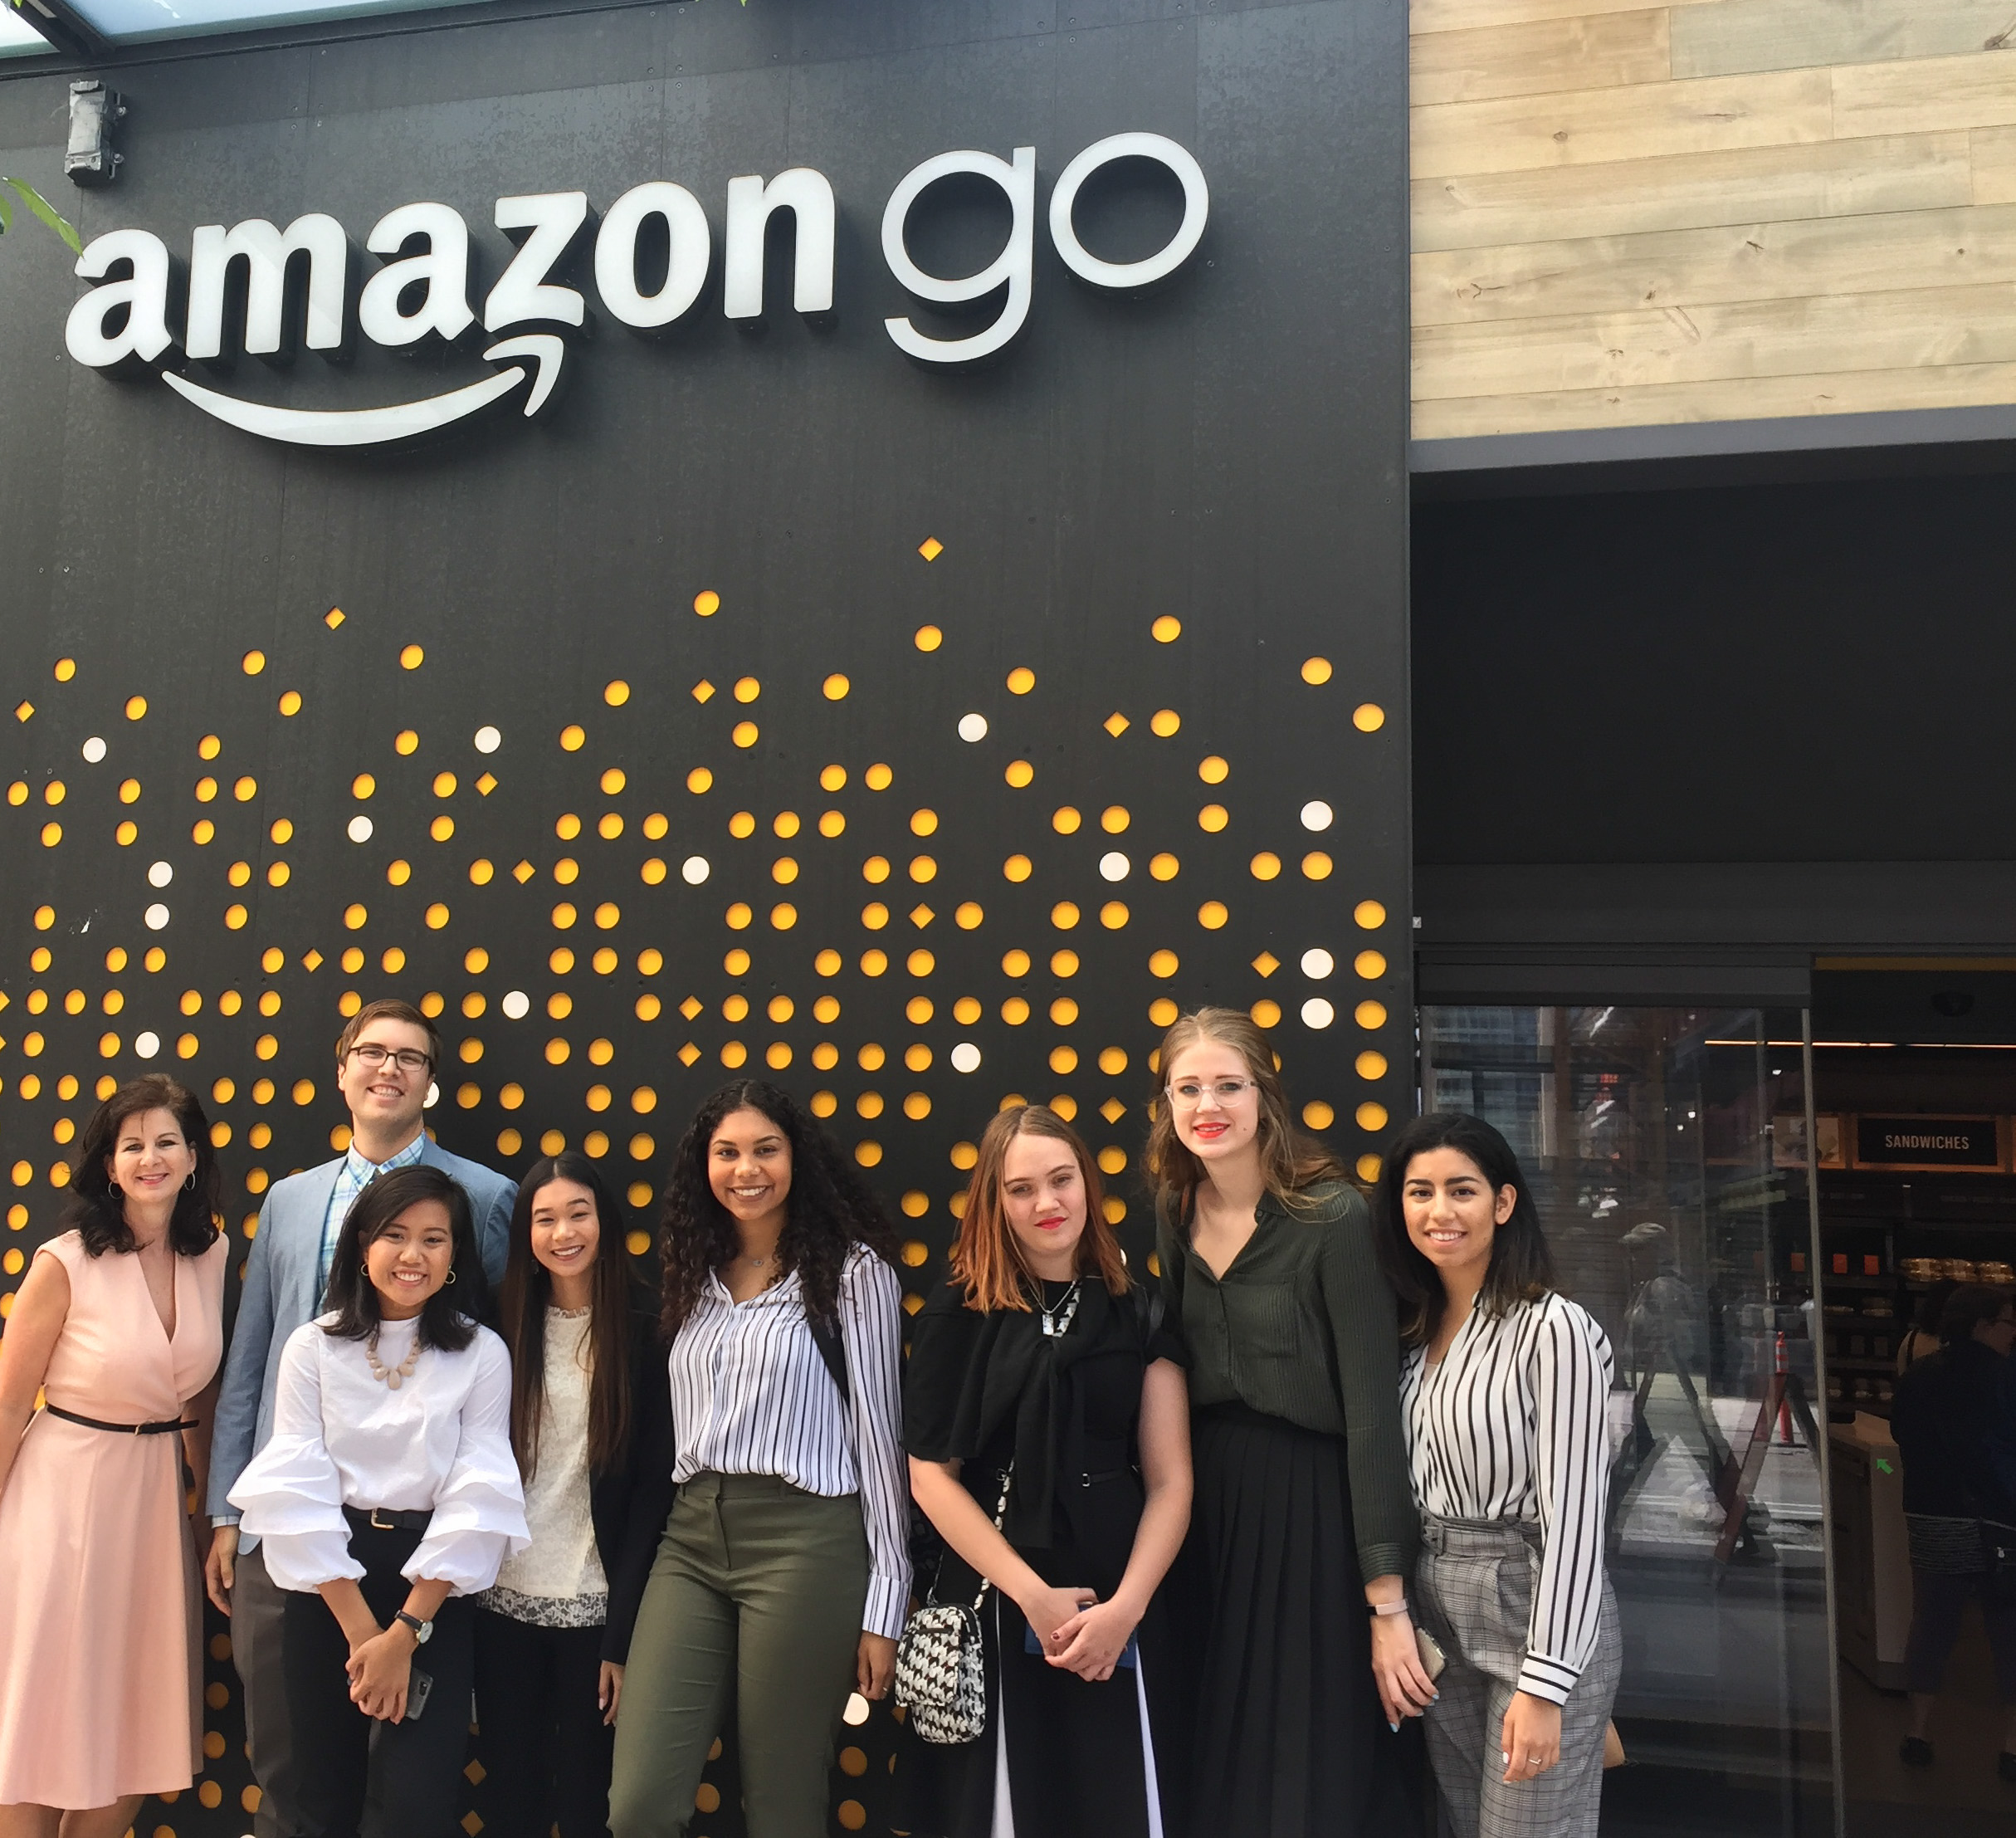 University of North Texas students and Linda Mihalick visiting Amazon headquarters in Seattle